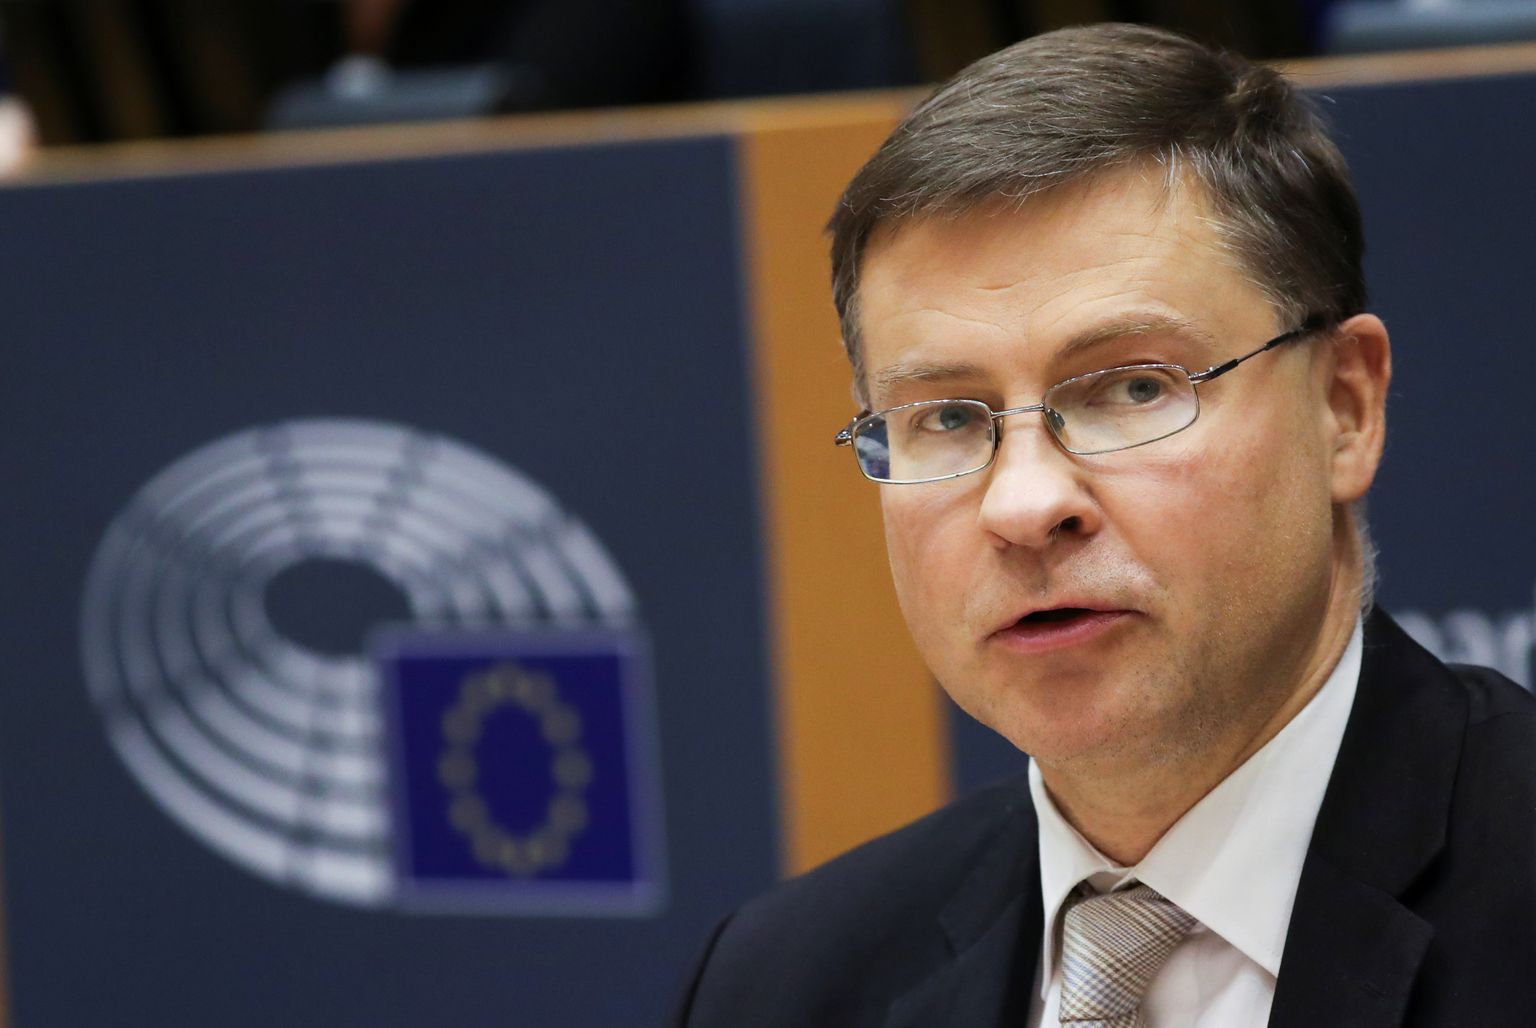 European Commission Vice President Valdis Dombrovskis speaks during his hearing before the European Parliament's trade committee, in Brussels, Belgium, October 2, 2020.  REUTERS/Yves Herman